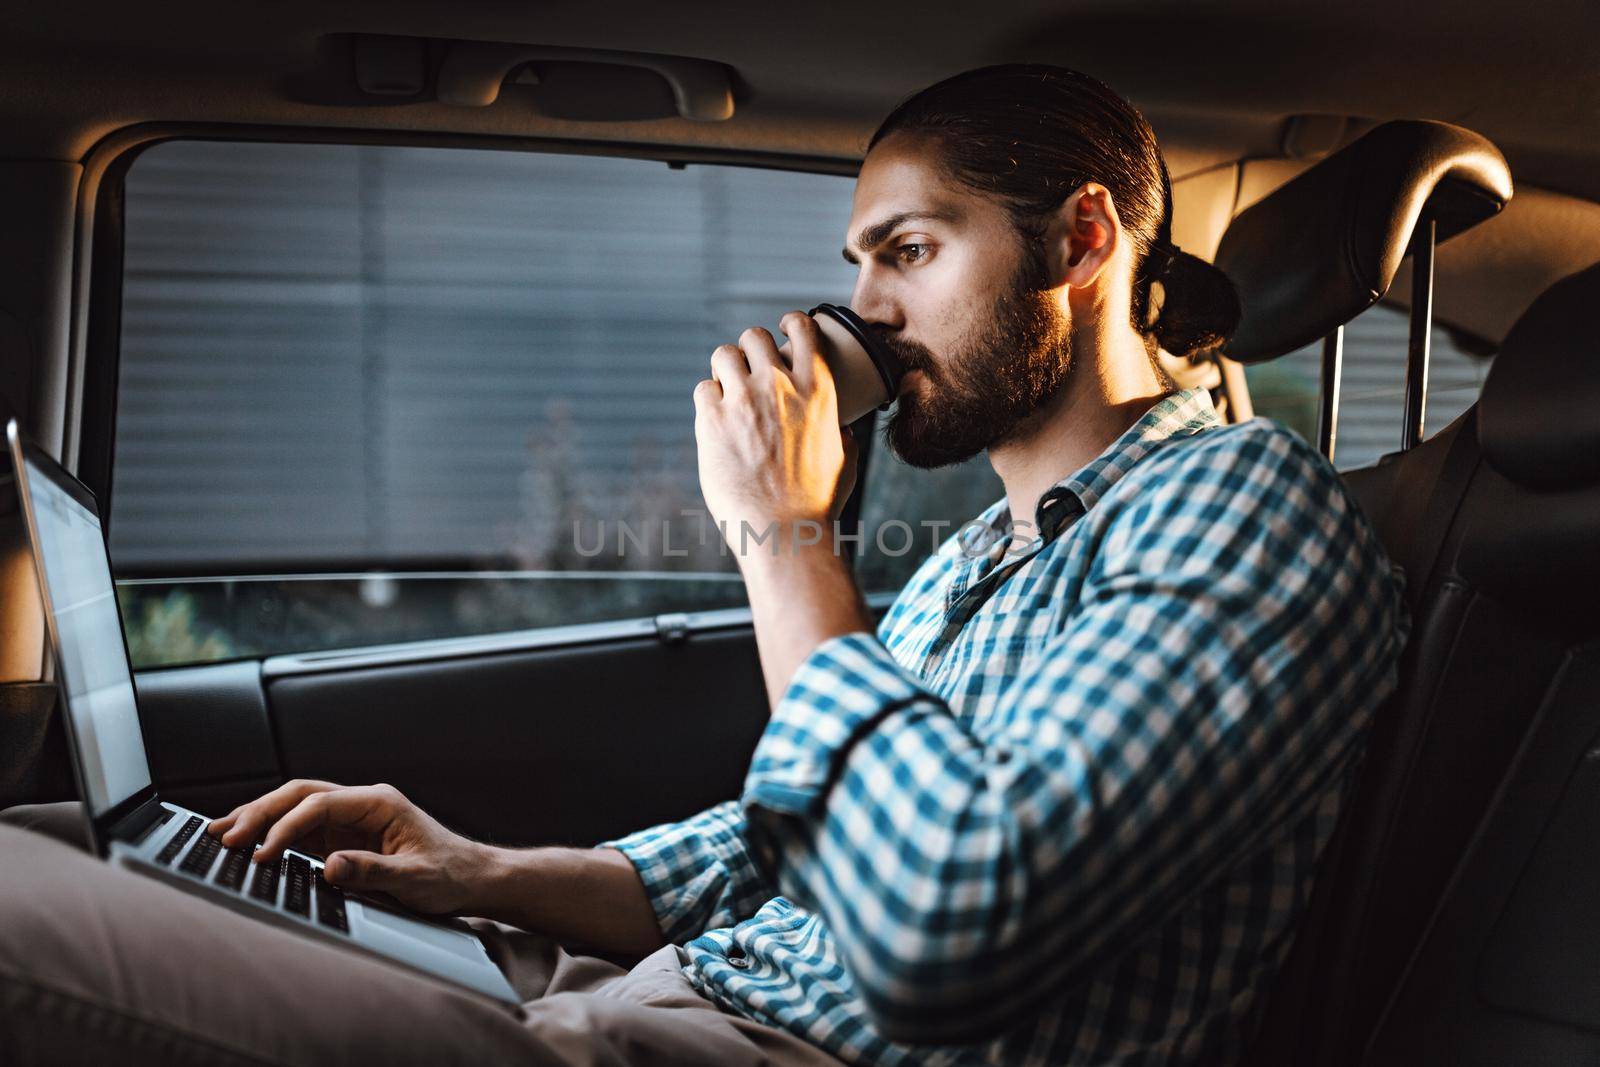 Young confident businessman is holding a cup of coffee in his hand, drinking and texting on a laptop on the back seat in car.